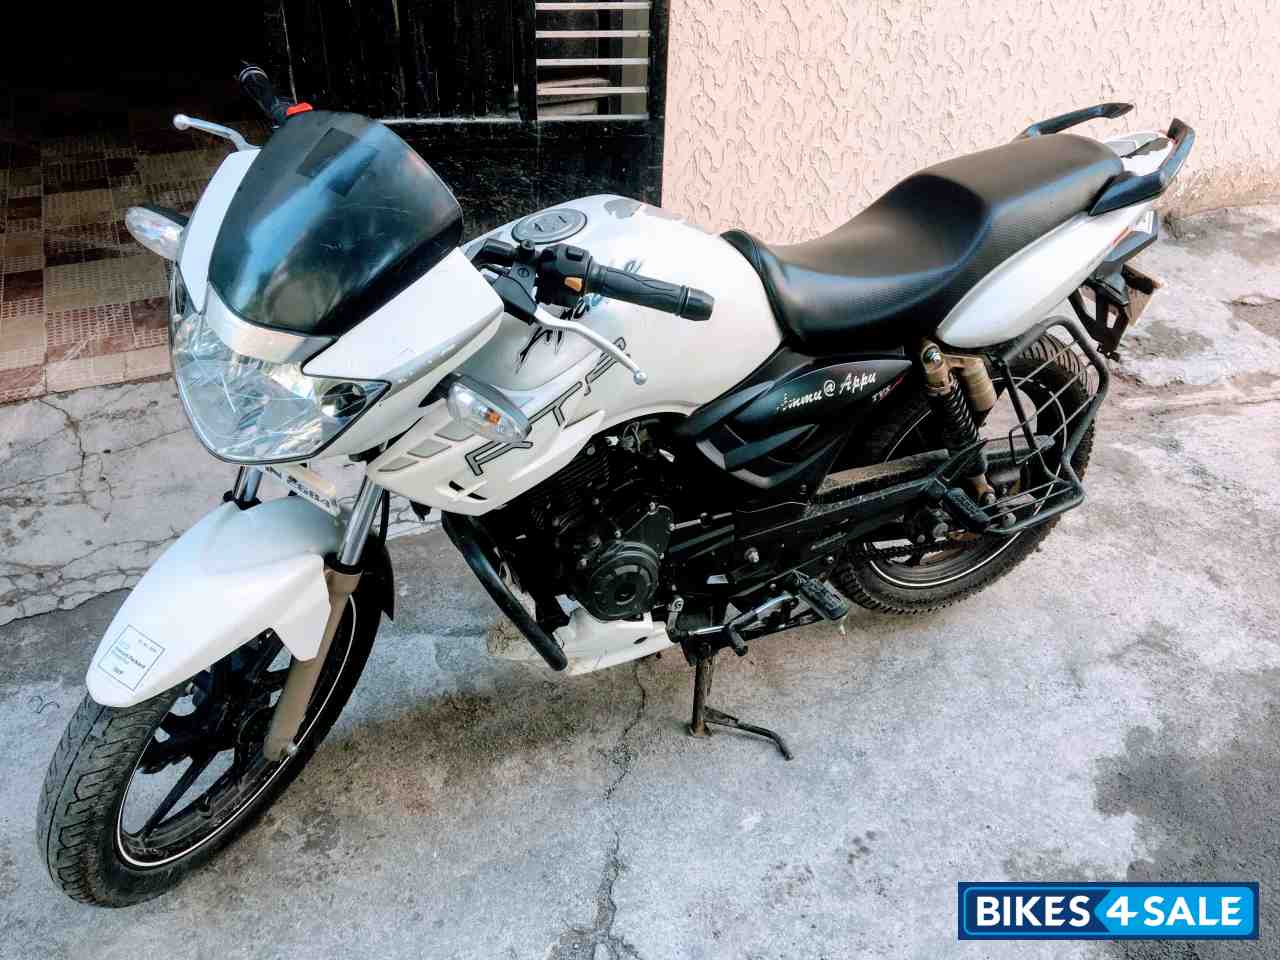 Used 2010 Model Tvs Apache Rtr 180 For Sale In Bangalore Id